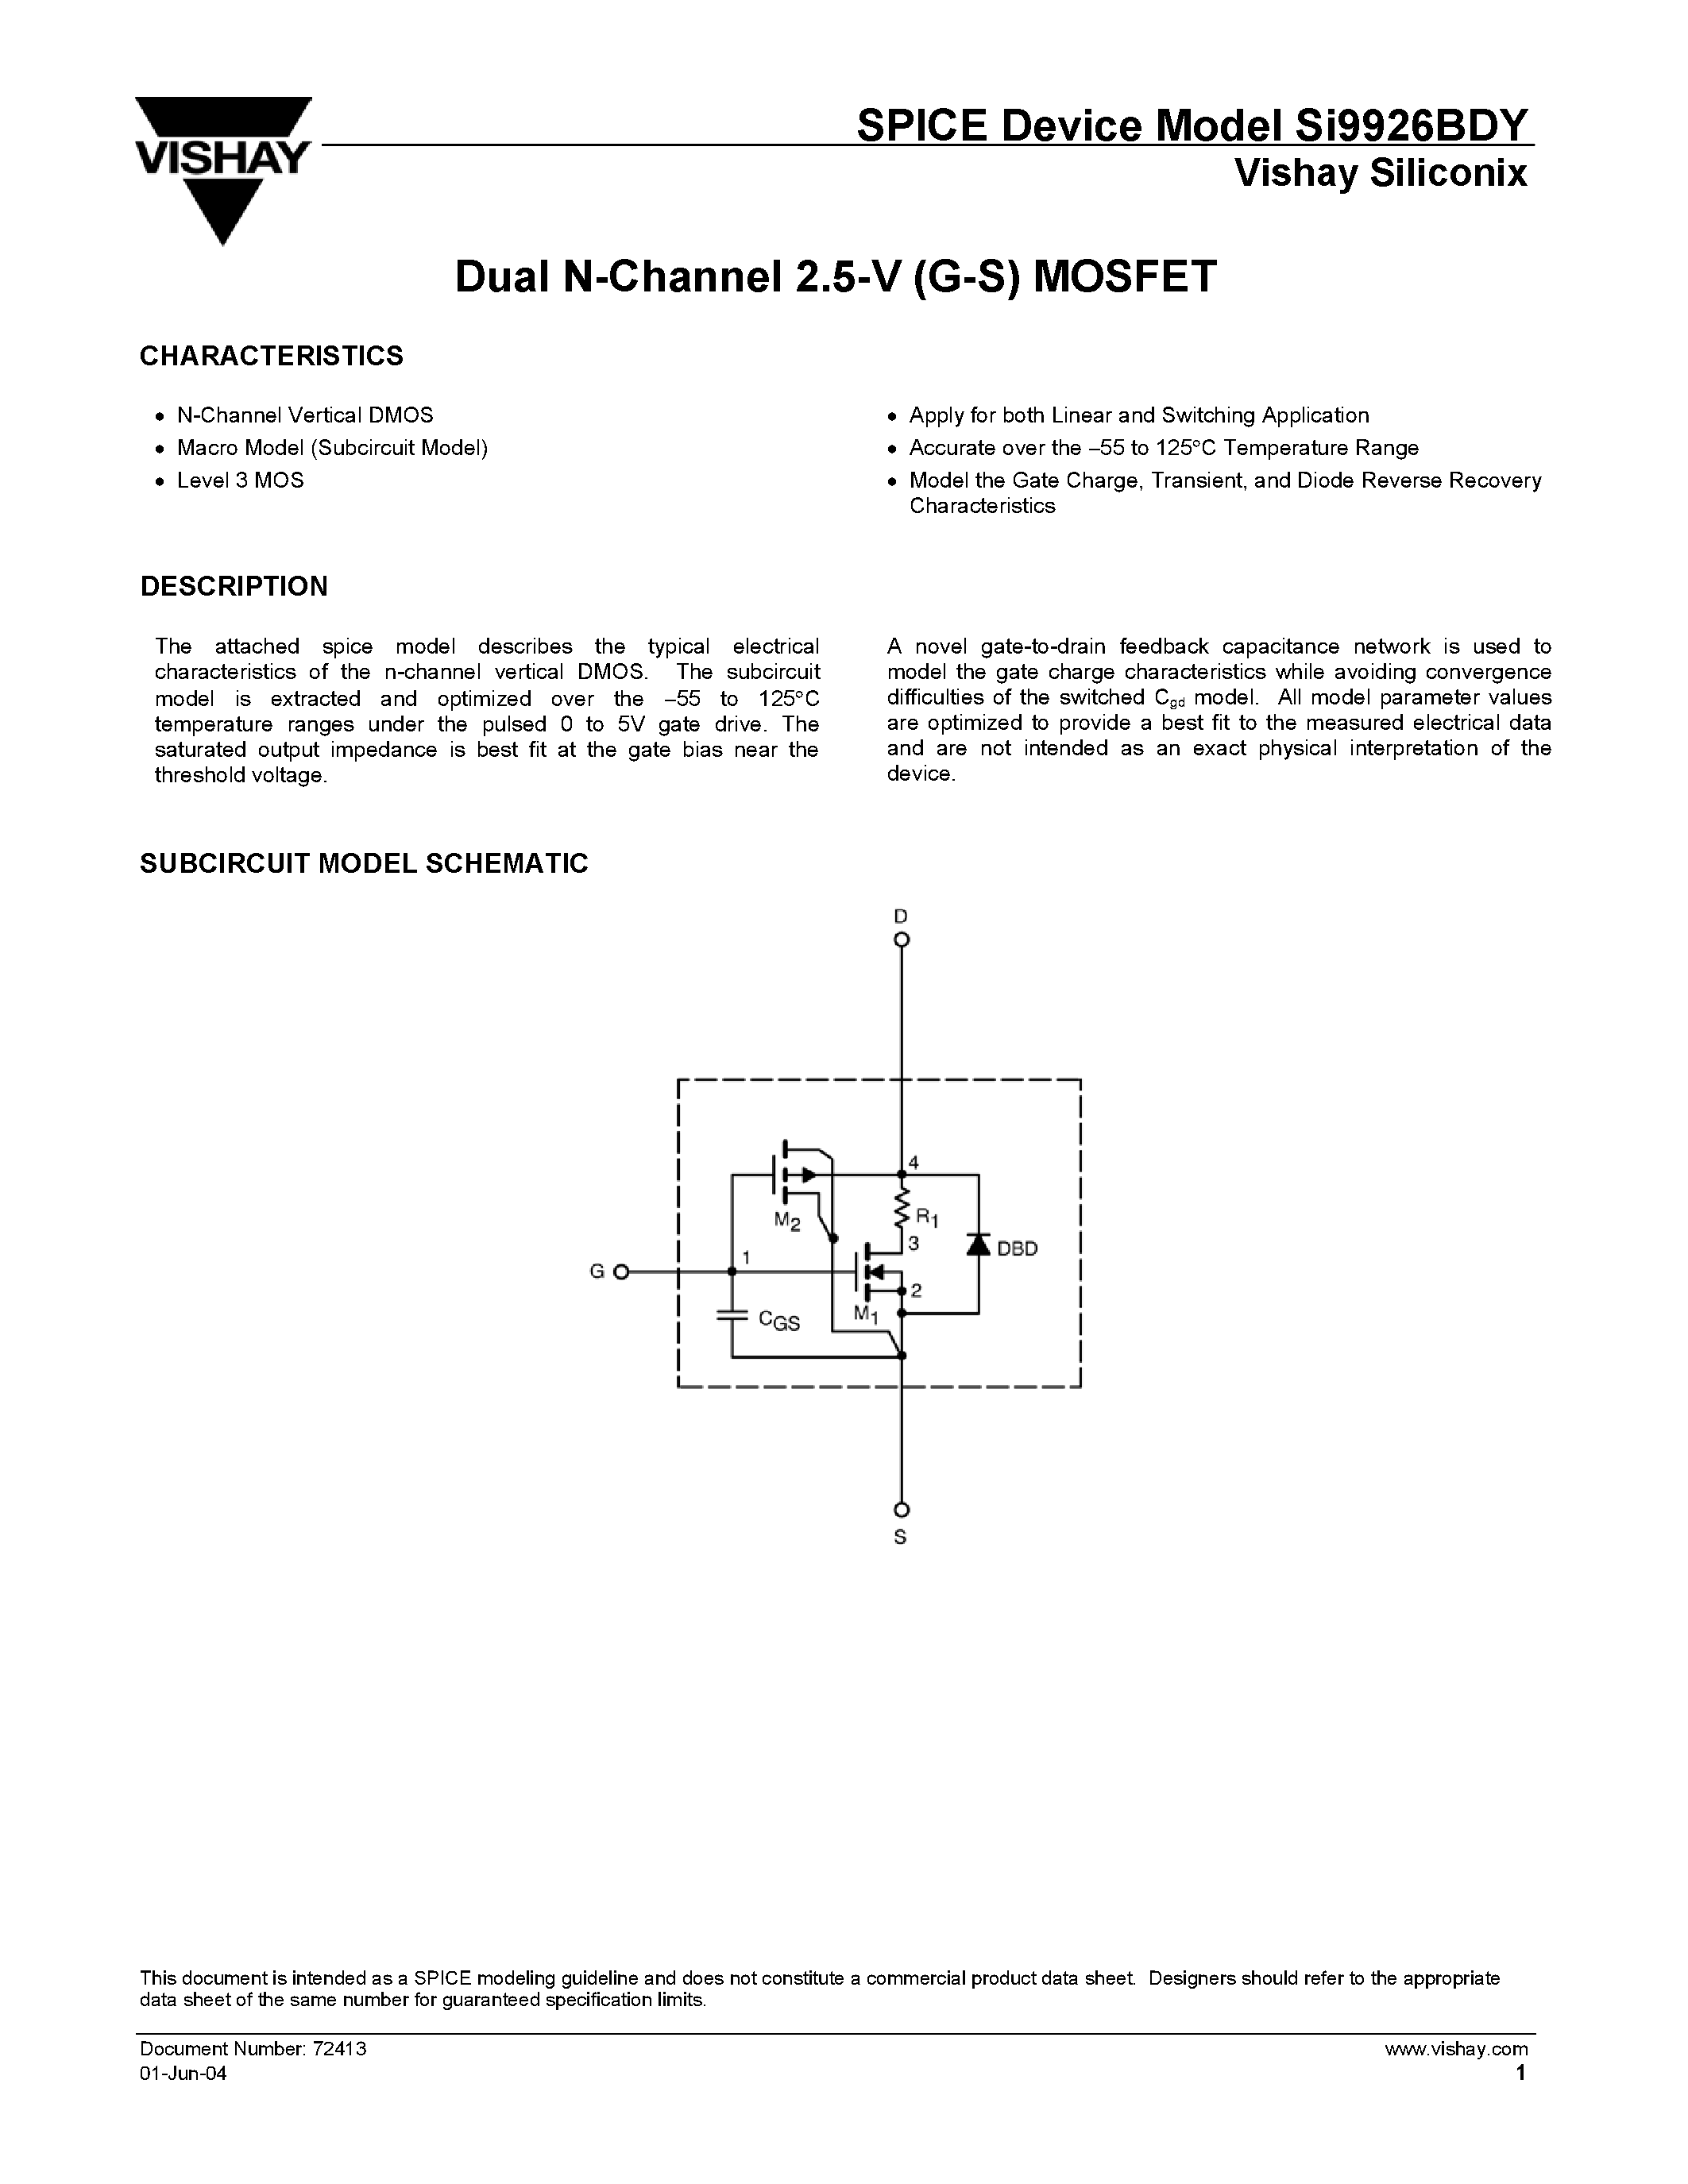 Даташит SI9926BDY - Dual N-Channel 2.5-V (G-S) MOSFET страница 1